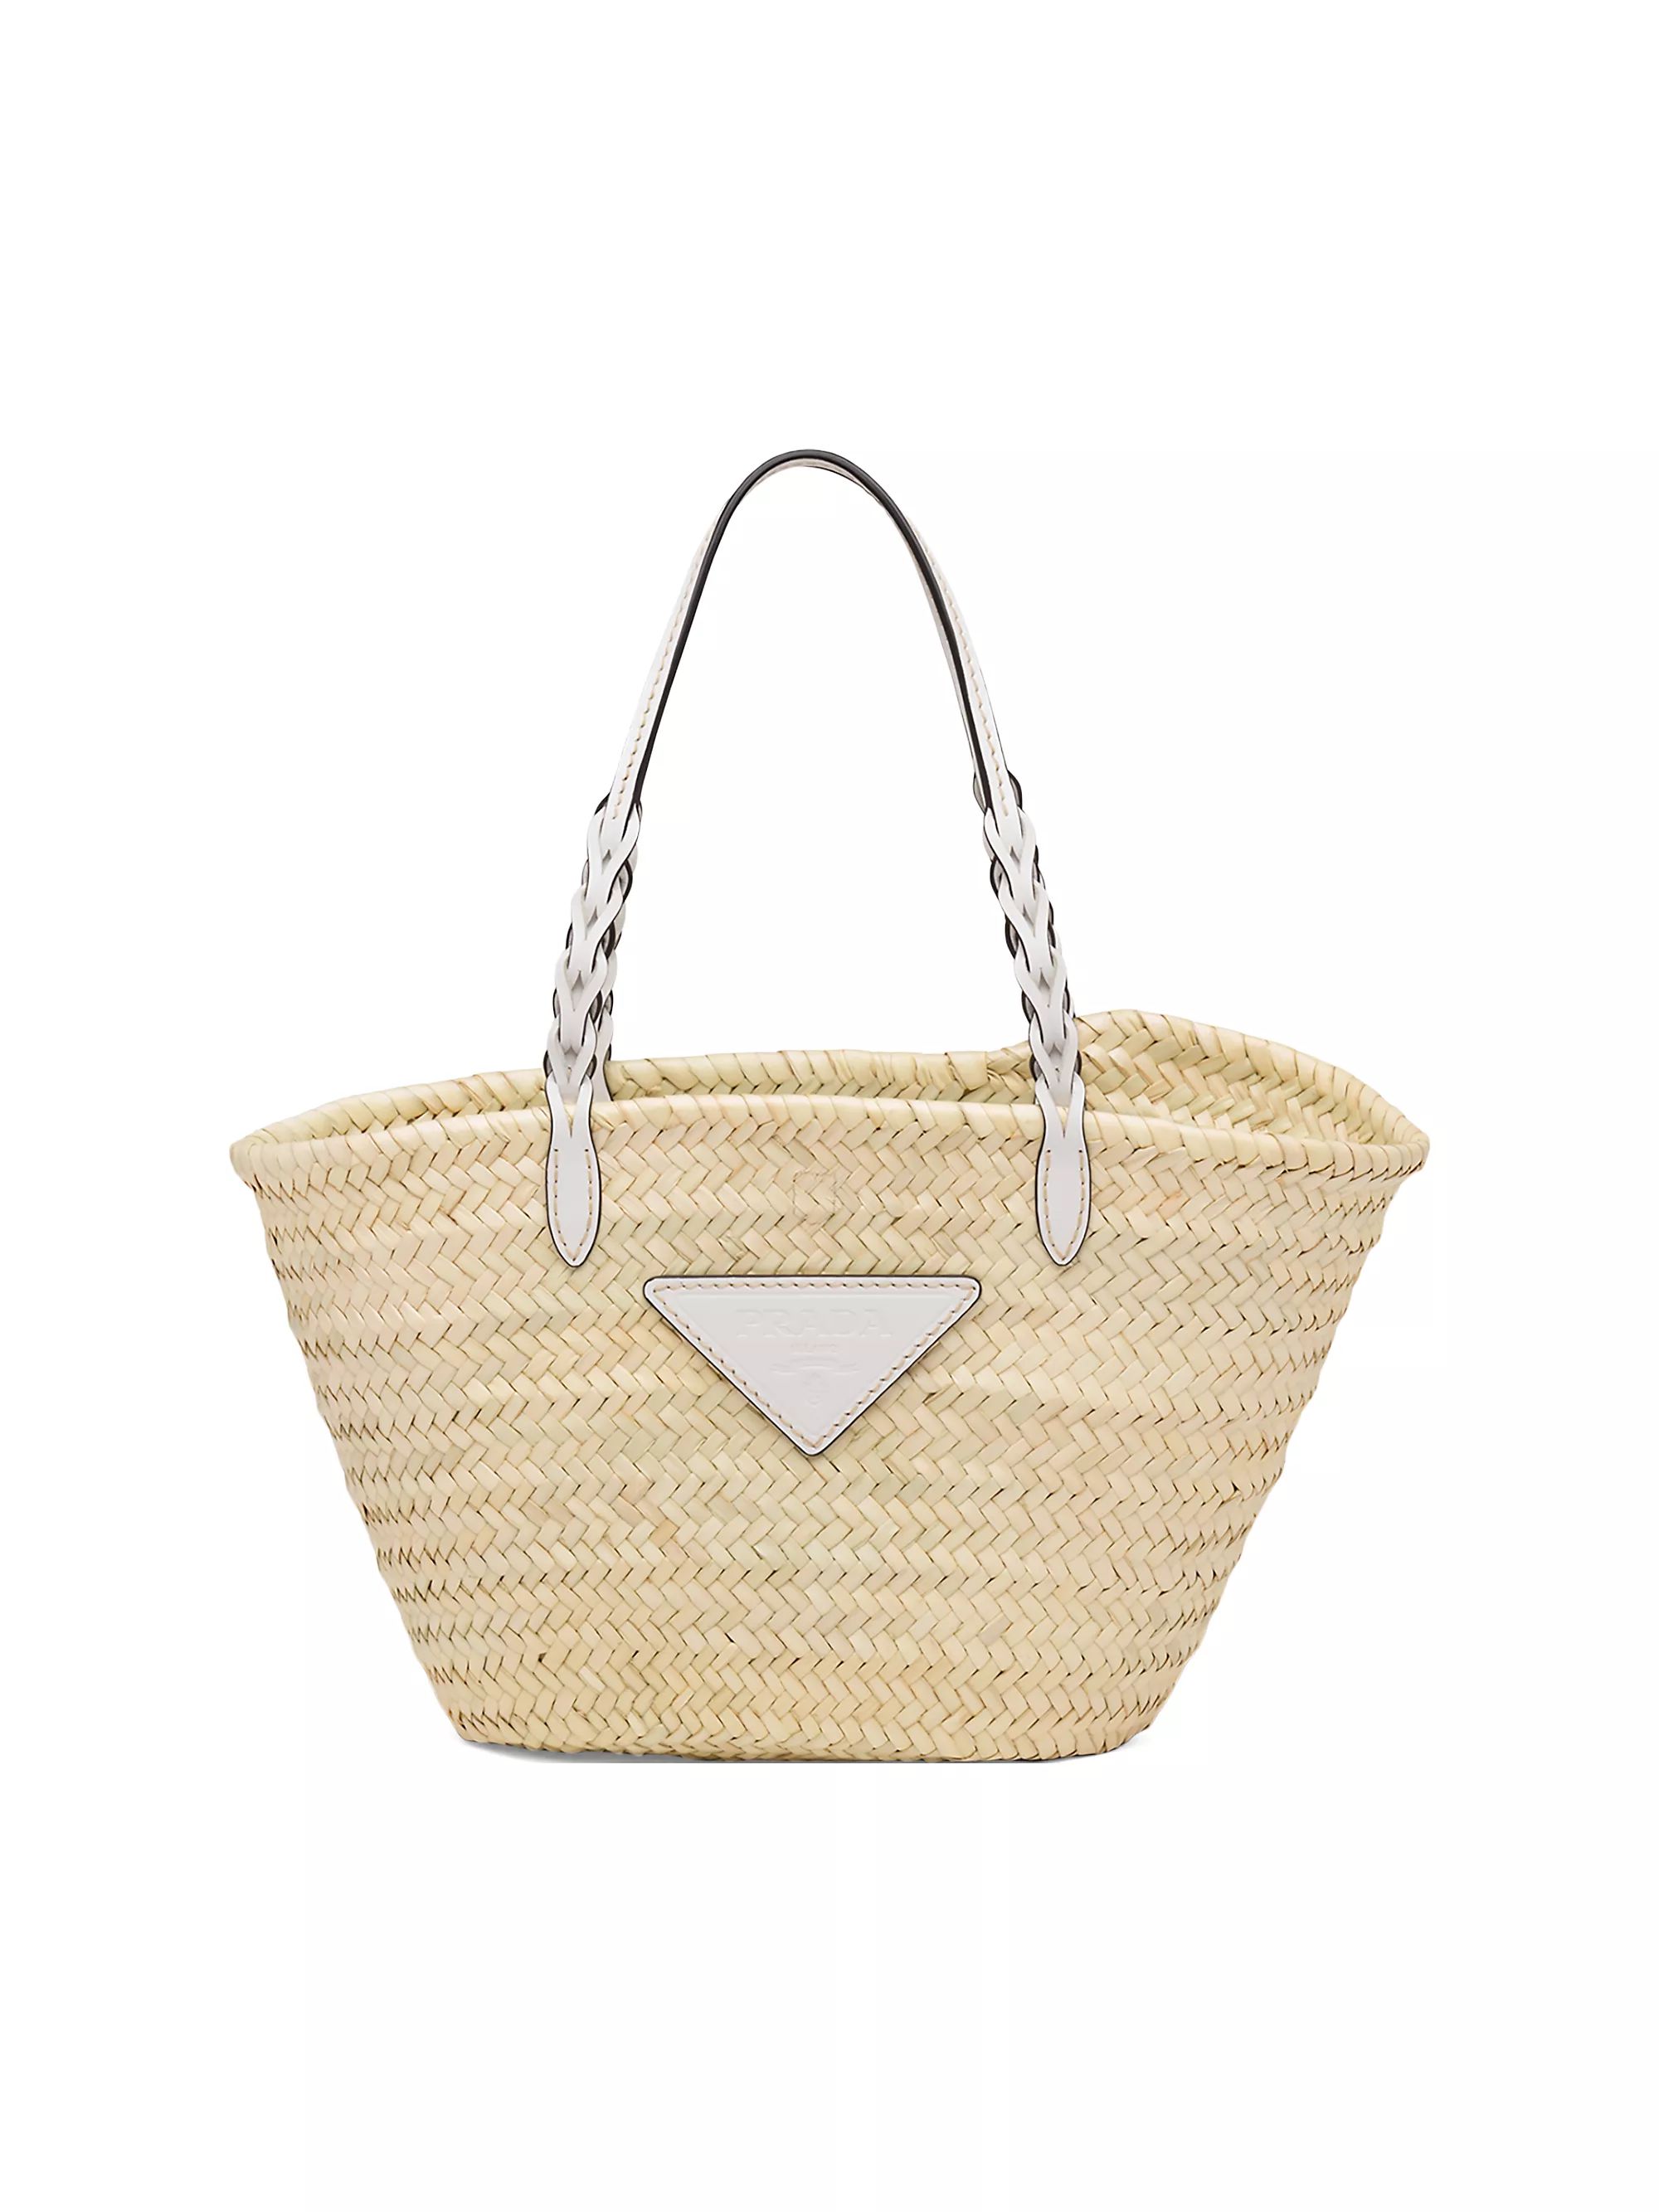 Woven Palm and Leather Tote | Saks Fifth Avenue